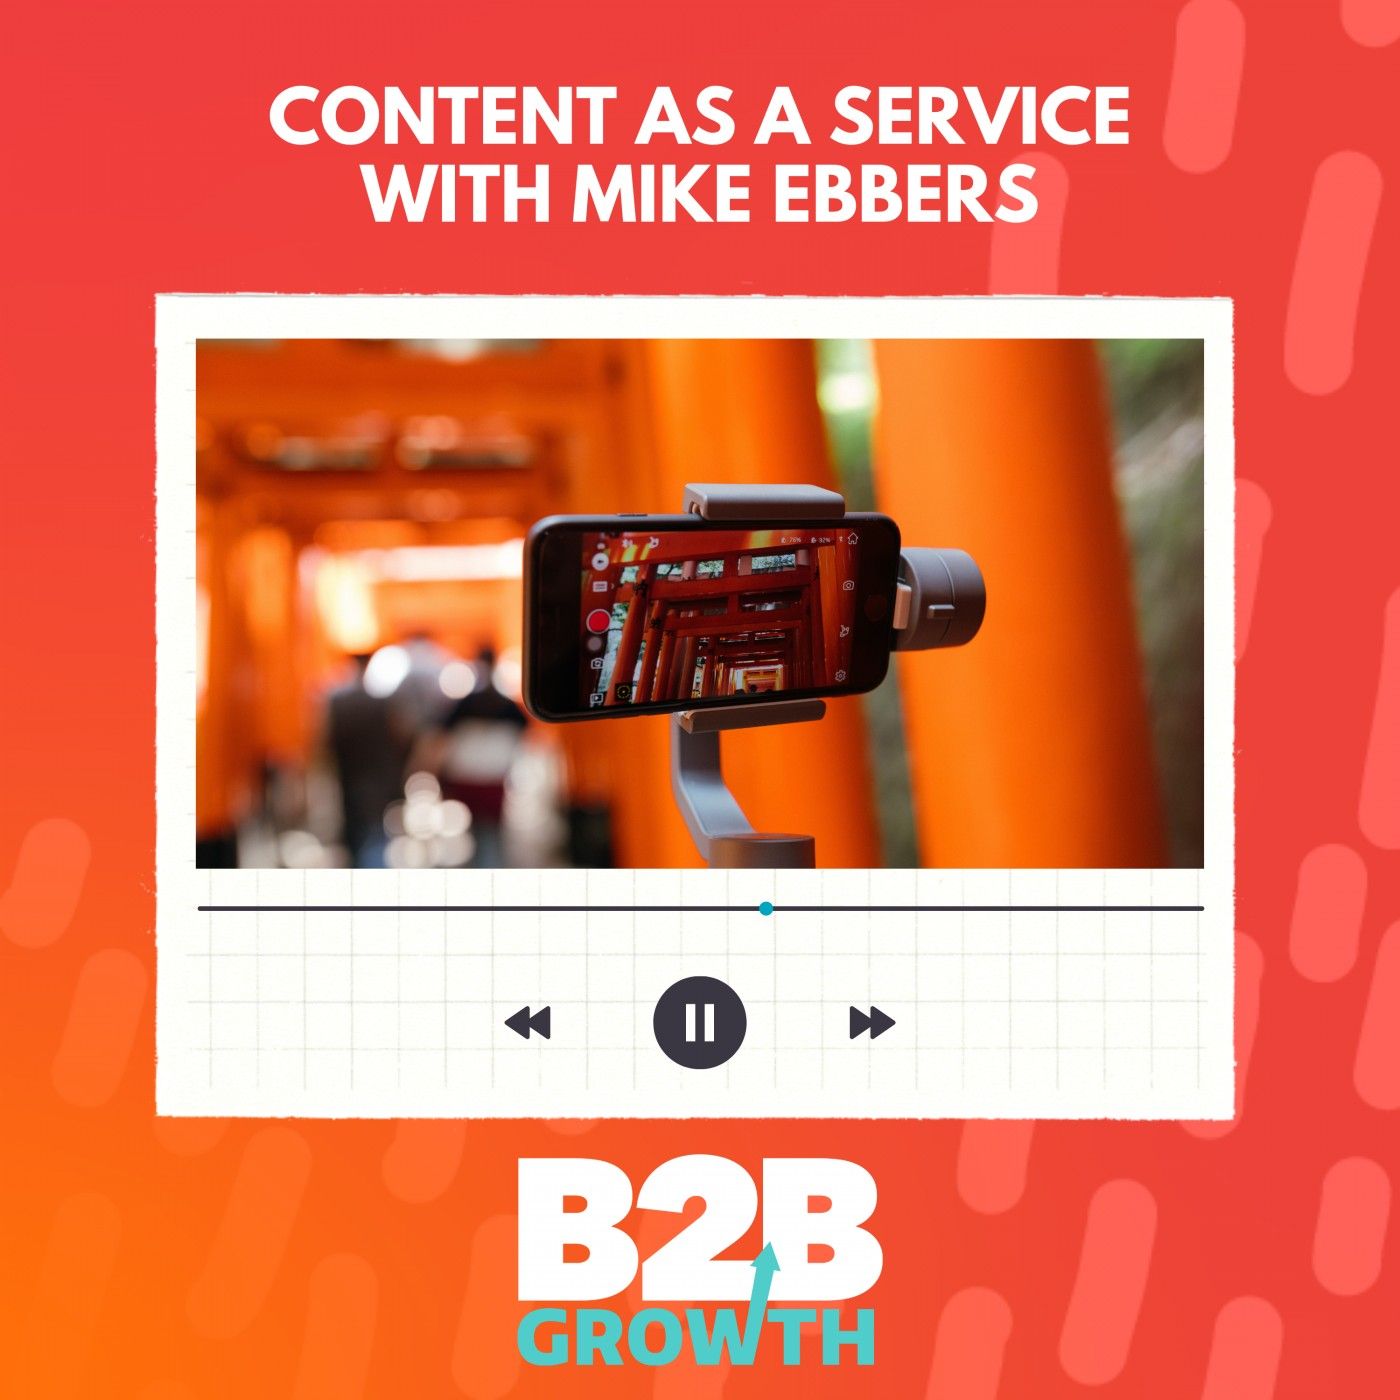 Content as a service, with Mike Ebbers